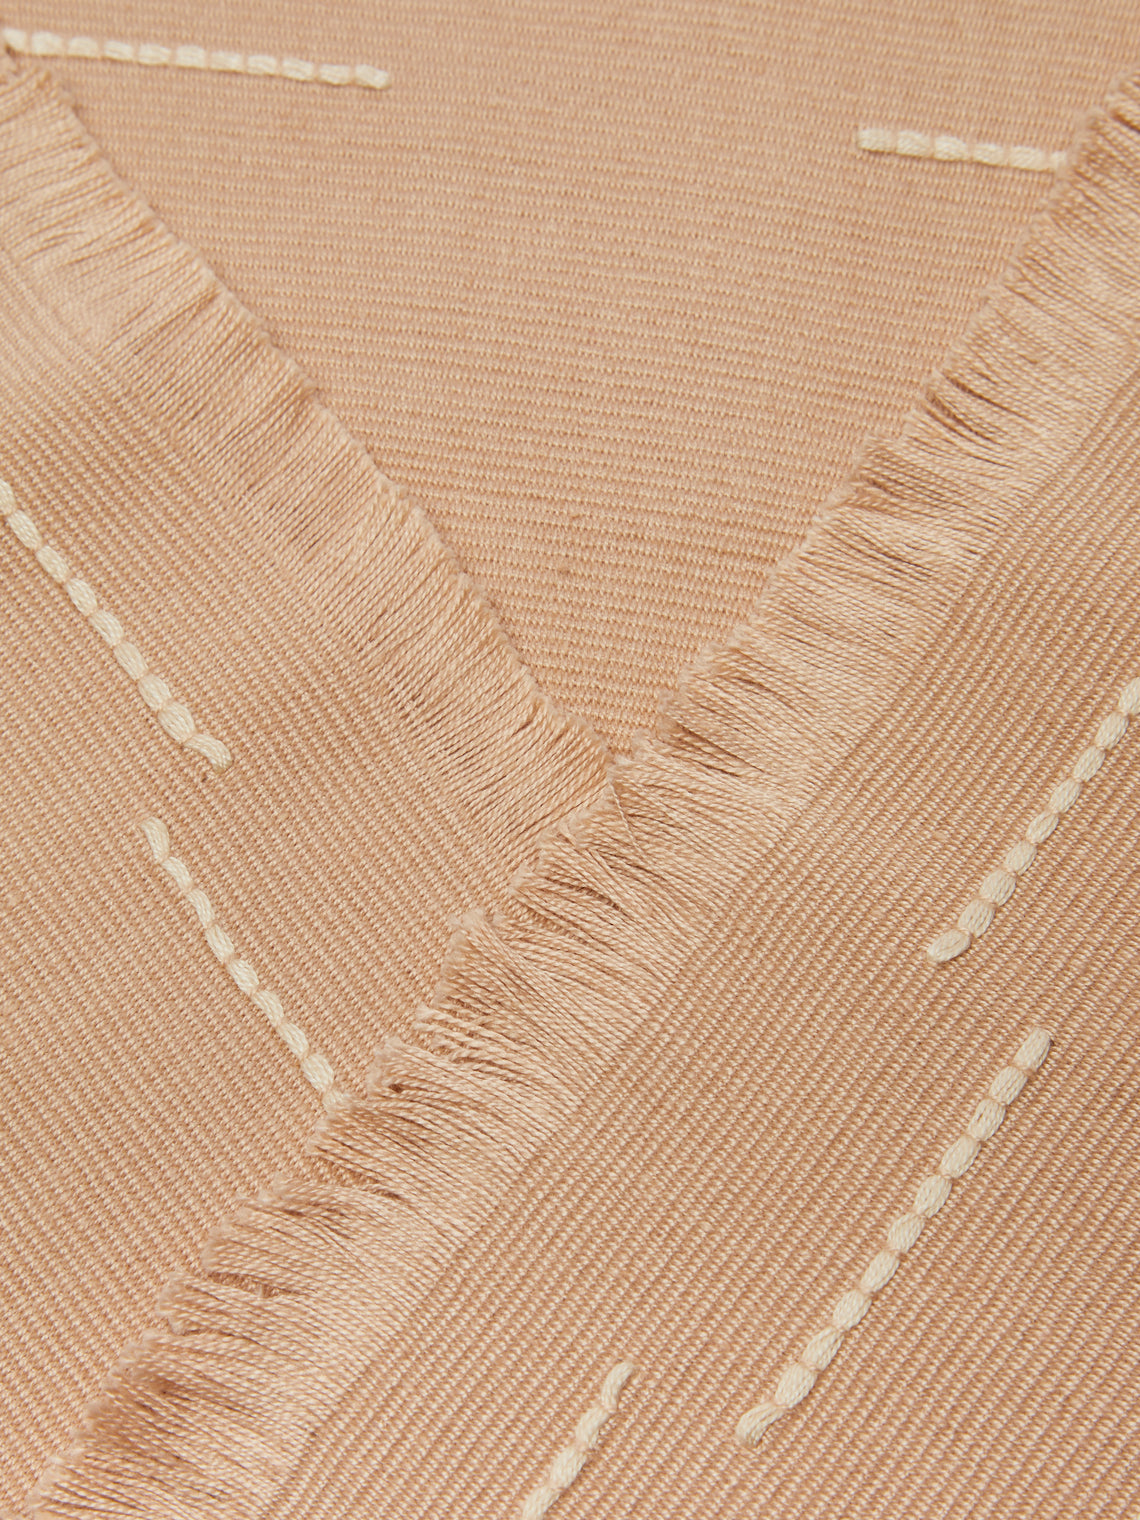 Revolution of Forms - Chiapas Handwoven Cotton Placemats (Set of 4) - Pink - ABASK